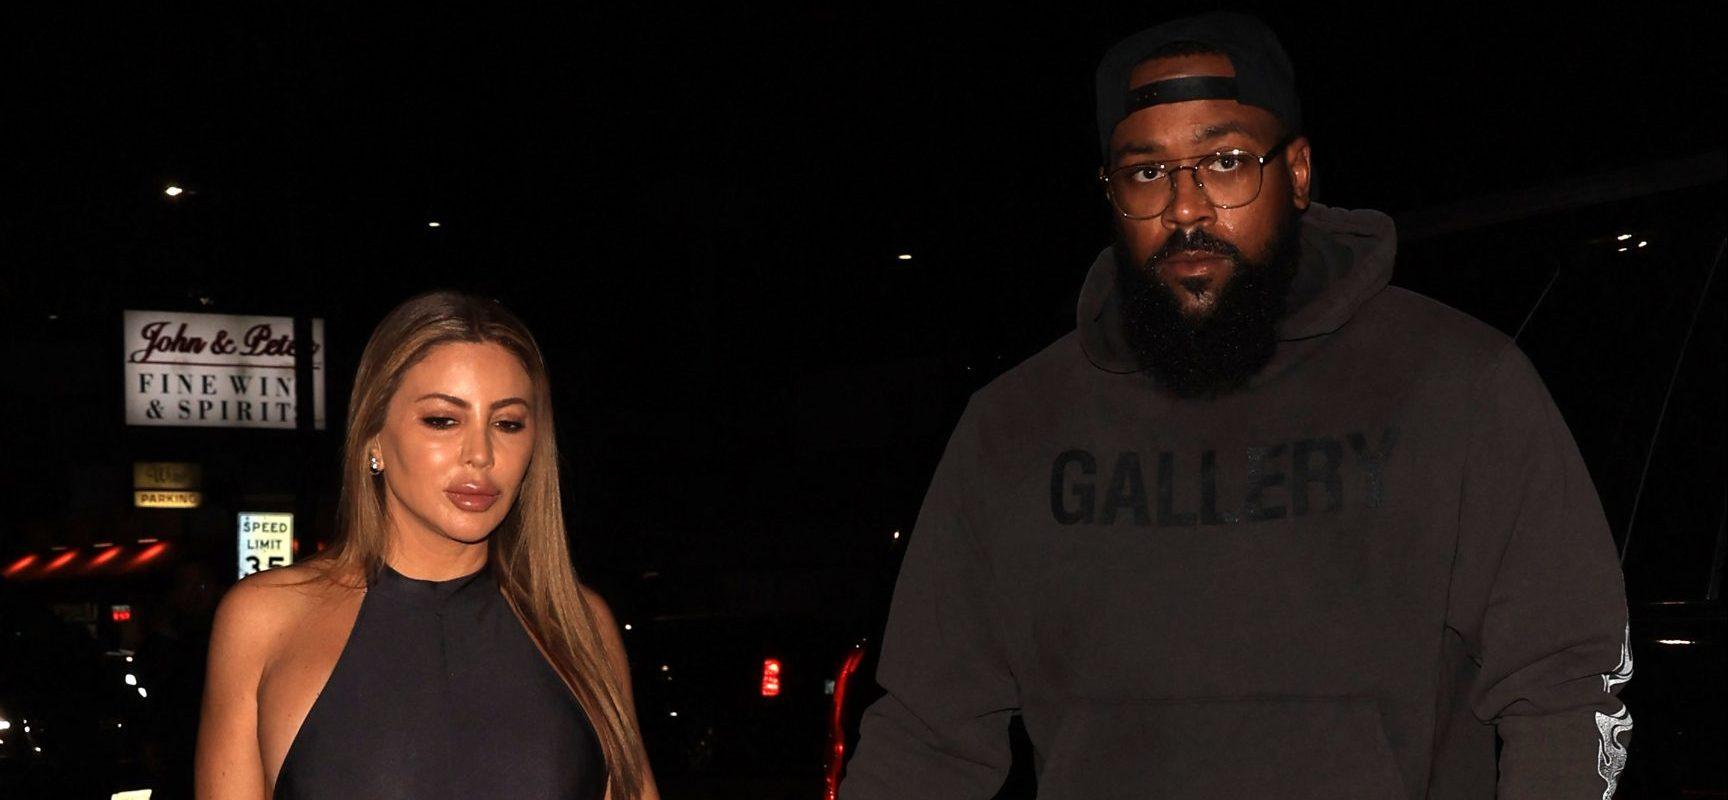 Marcus Jordan & Larsa Pippen Are Planning Their WEDDING Despite His Father, Michael’s Disapproval